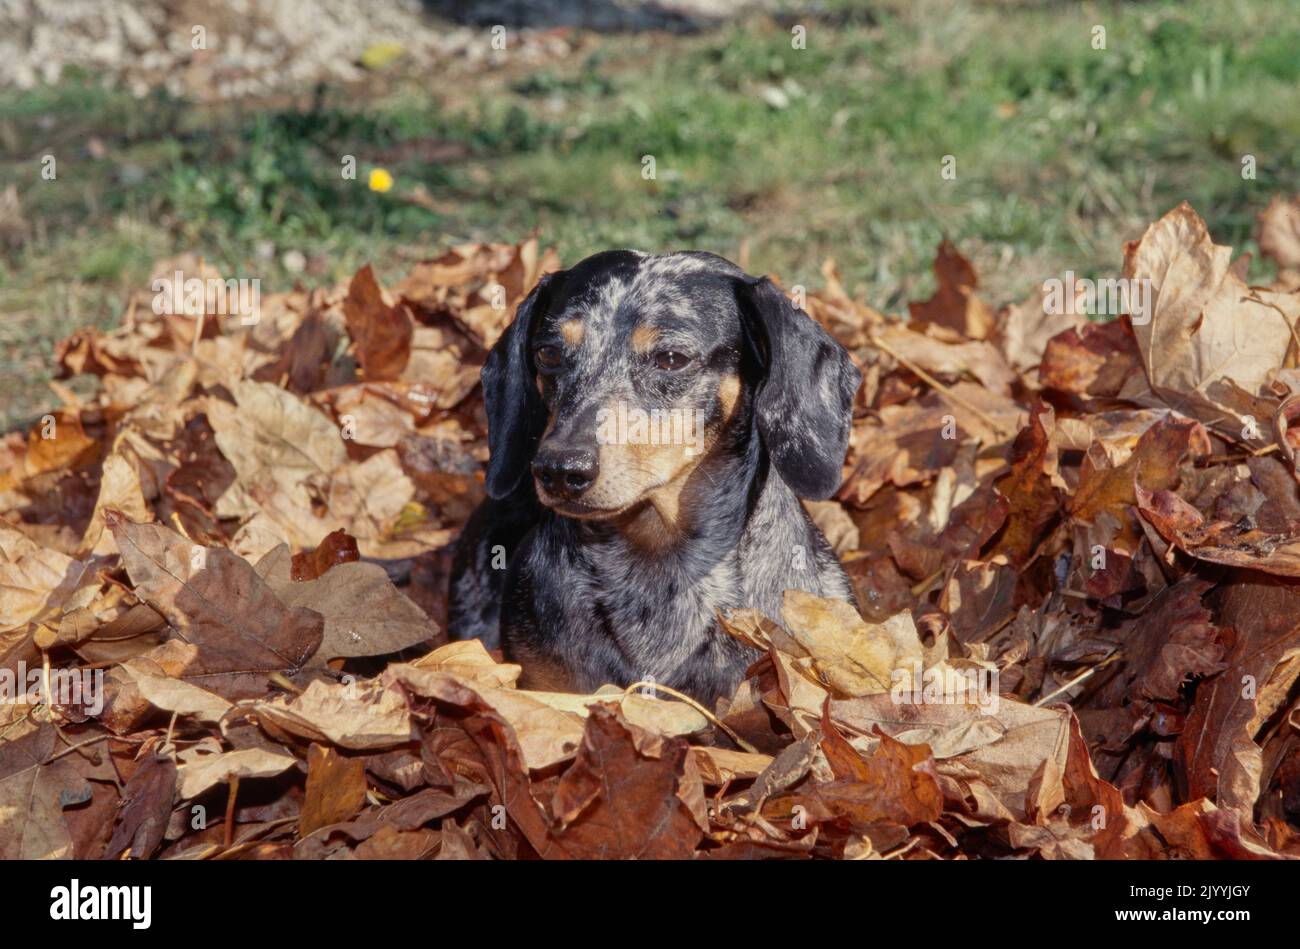 Dachshund in pile of leaves Stock Photo